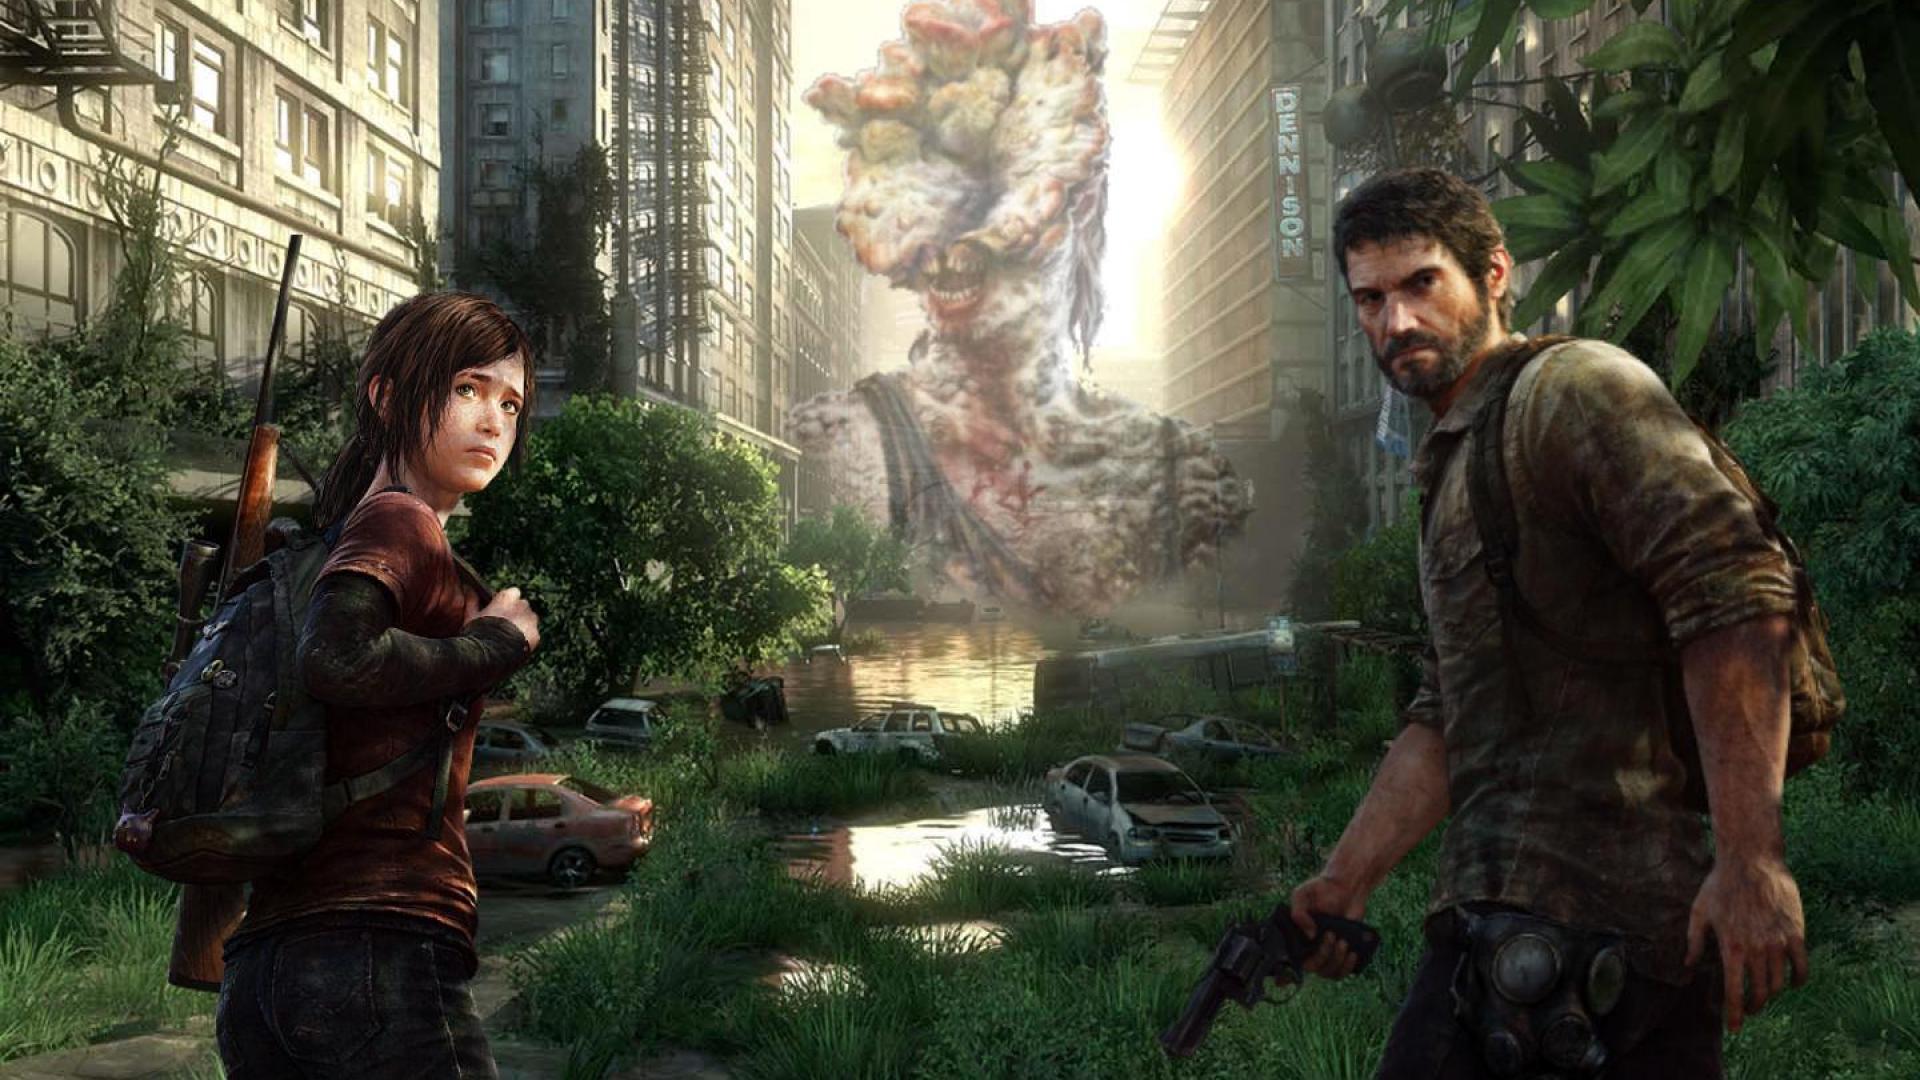 1920 x 1080 · jpeg - The Last of Us Wallpapers | Best Wallpapers